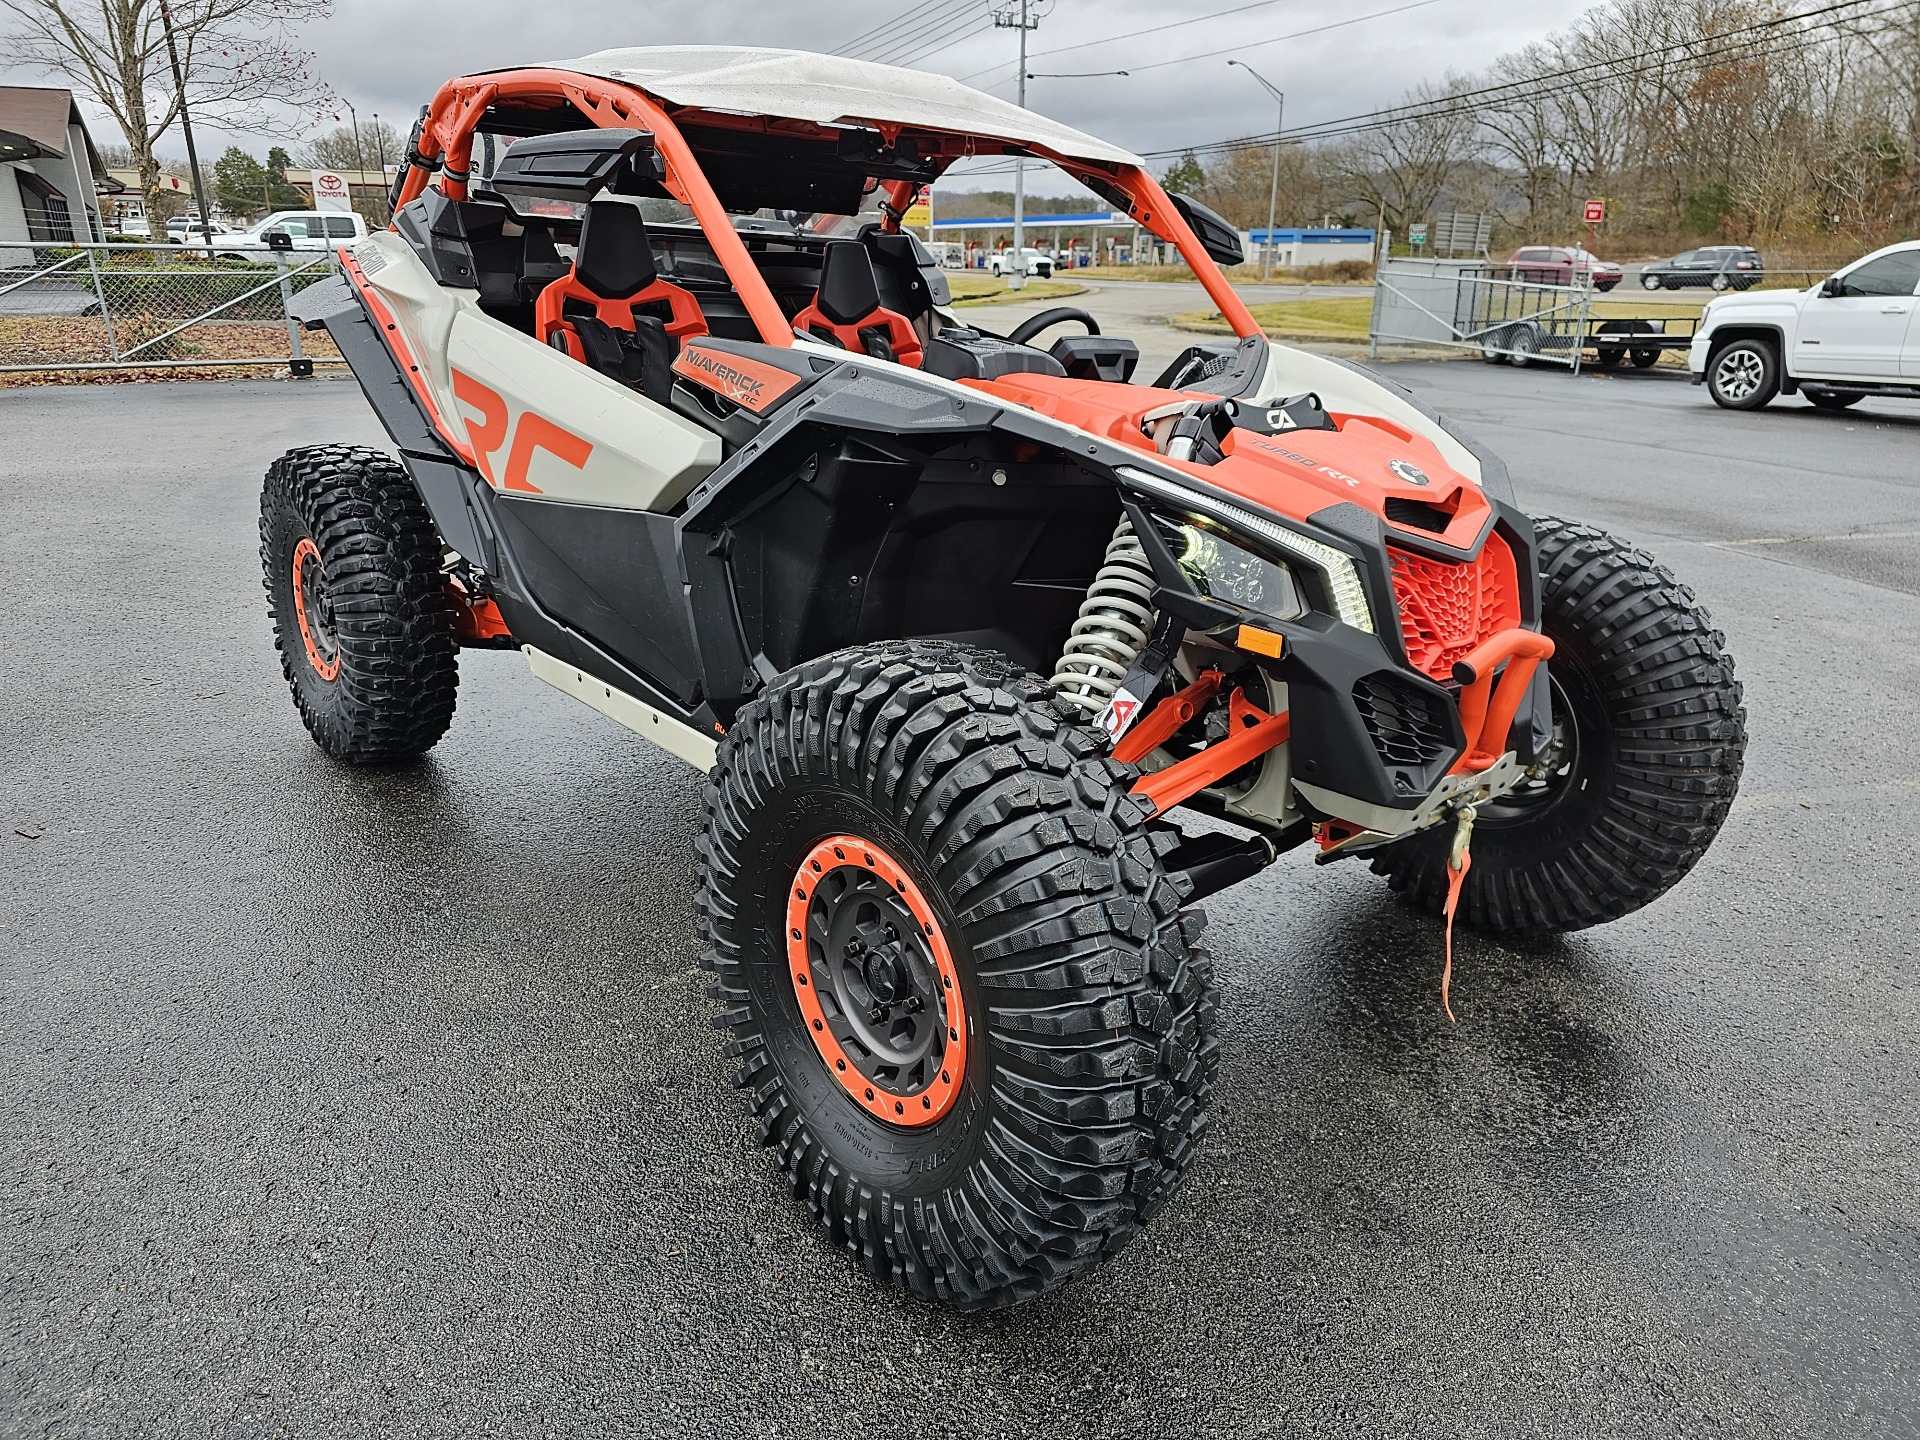 2021 Can-Am Maverick X3 X RC Turbo RR in Clinton, Tennessee - Photo 1